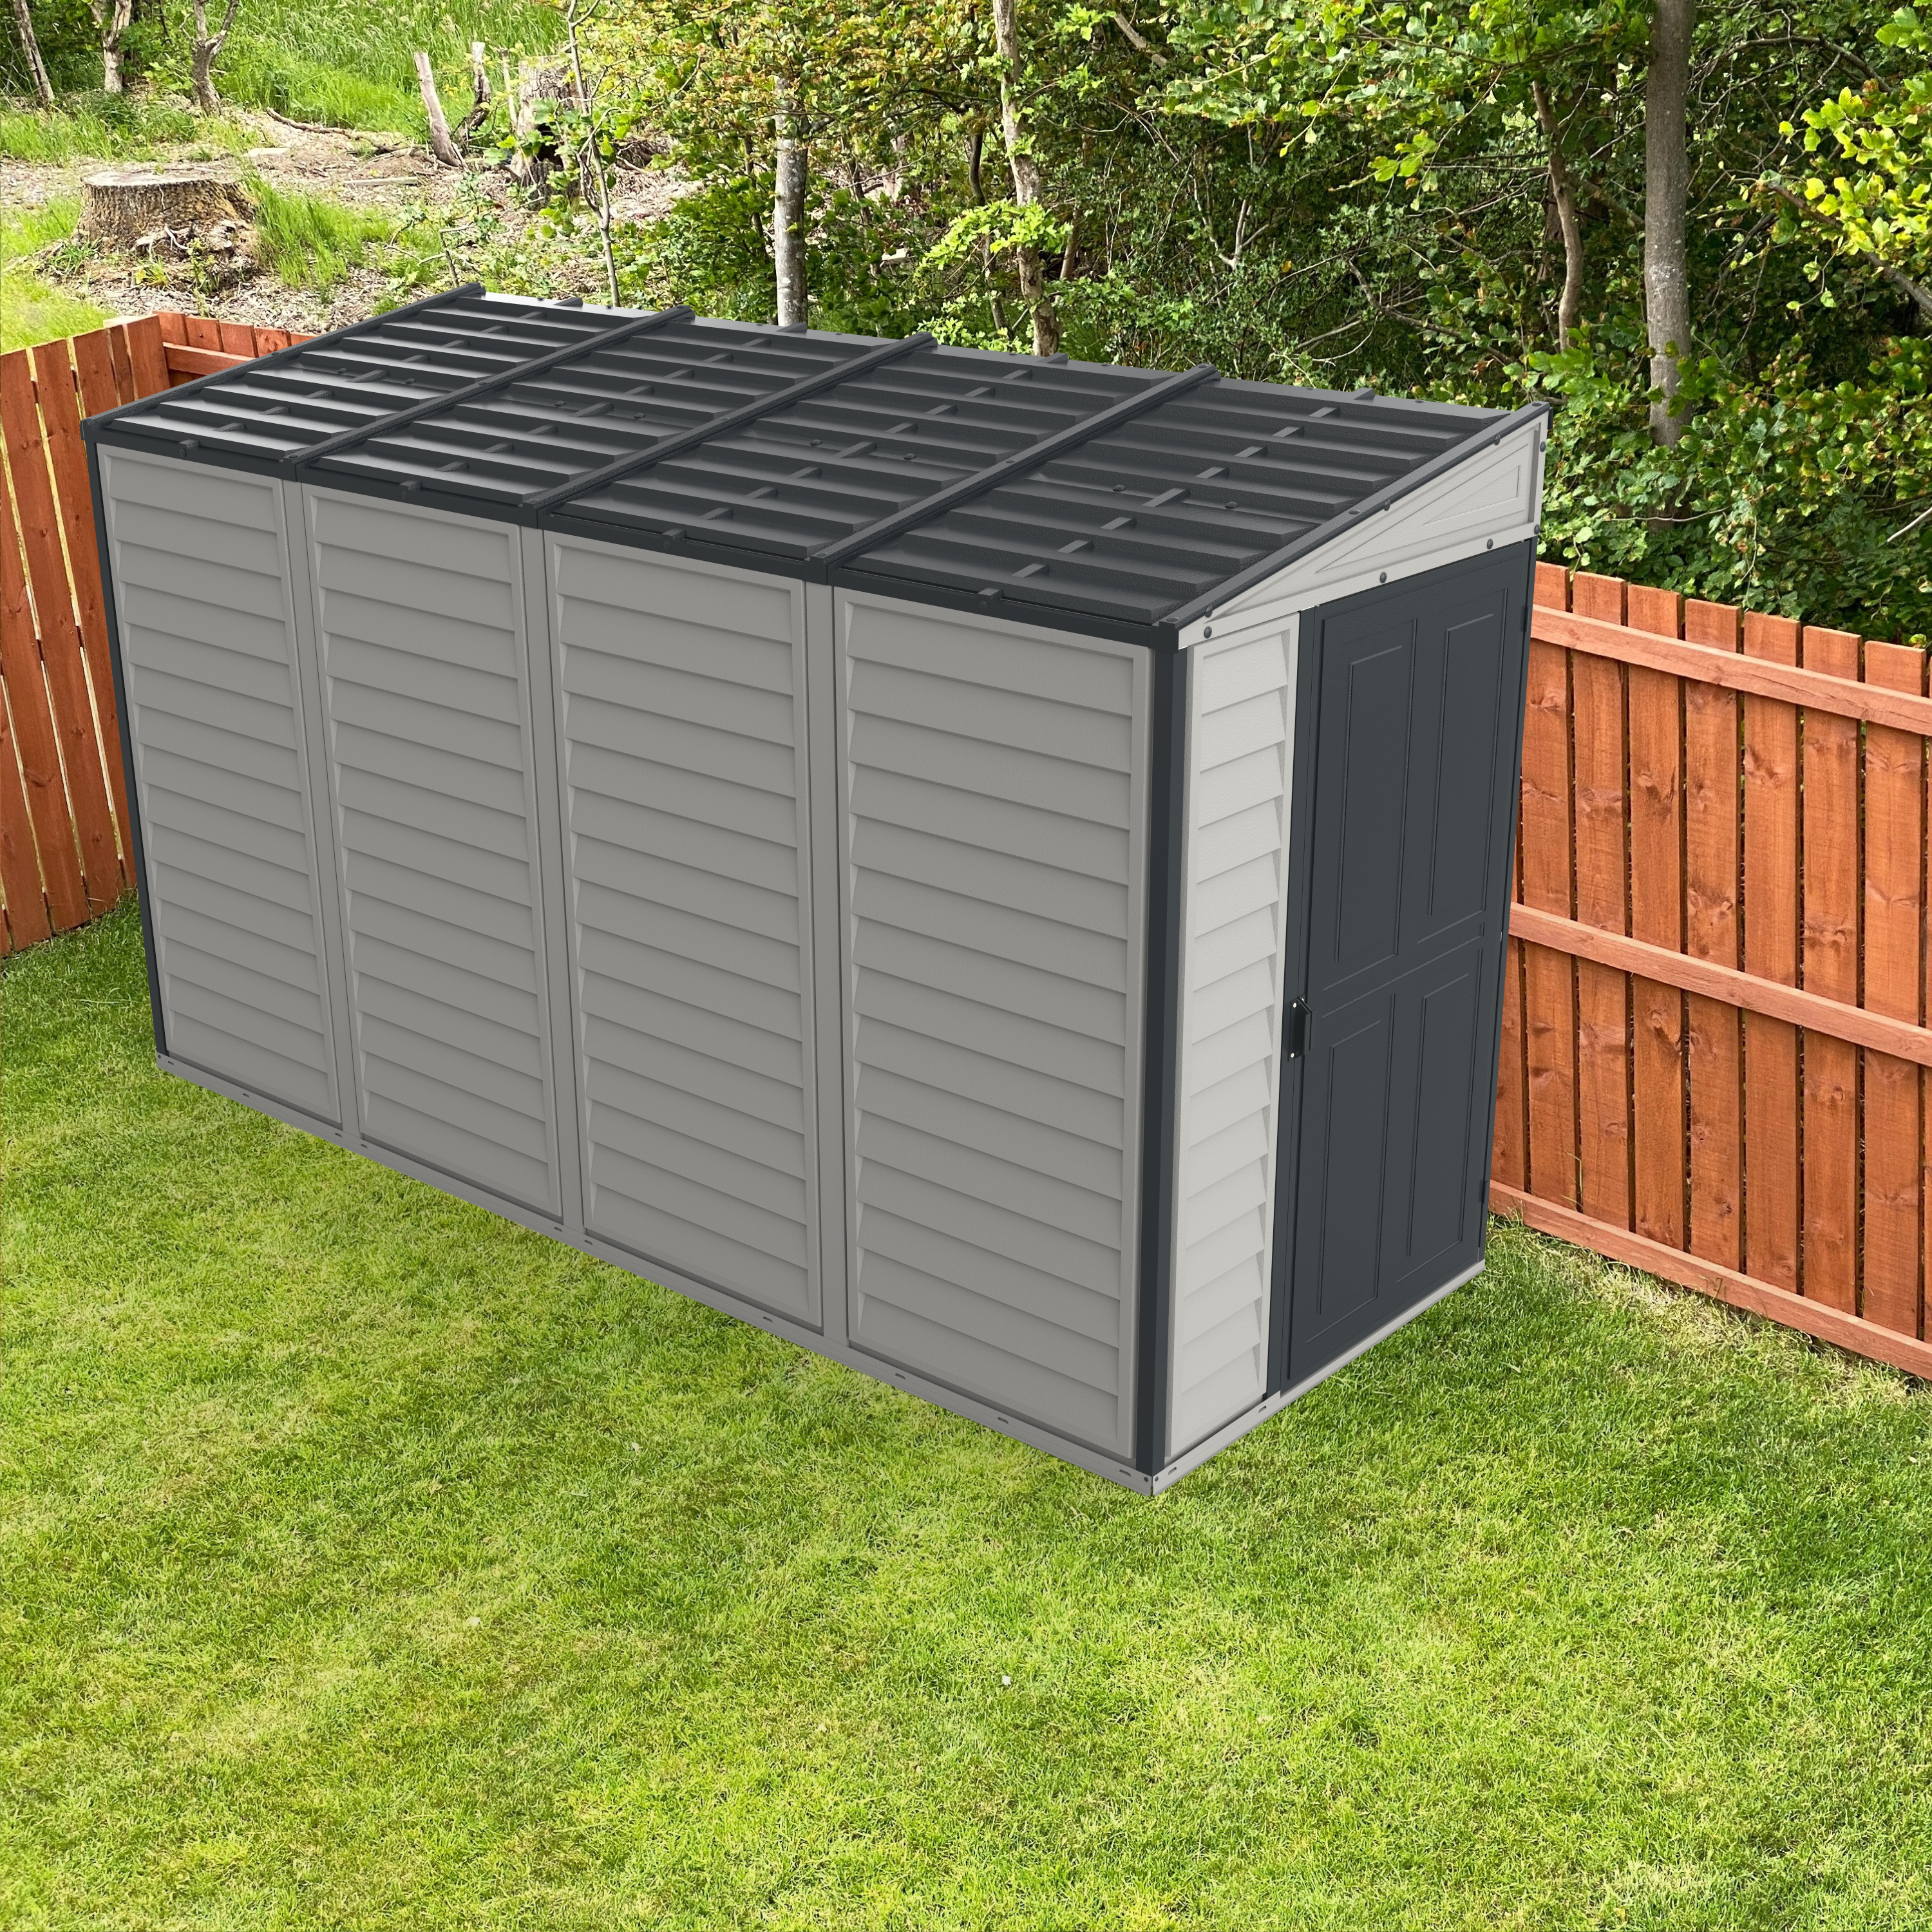 Duramax 4ft x 10ft SideMate Plus Vinyl Resin Outdoor Storage Shed With Foundation Kit